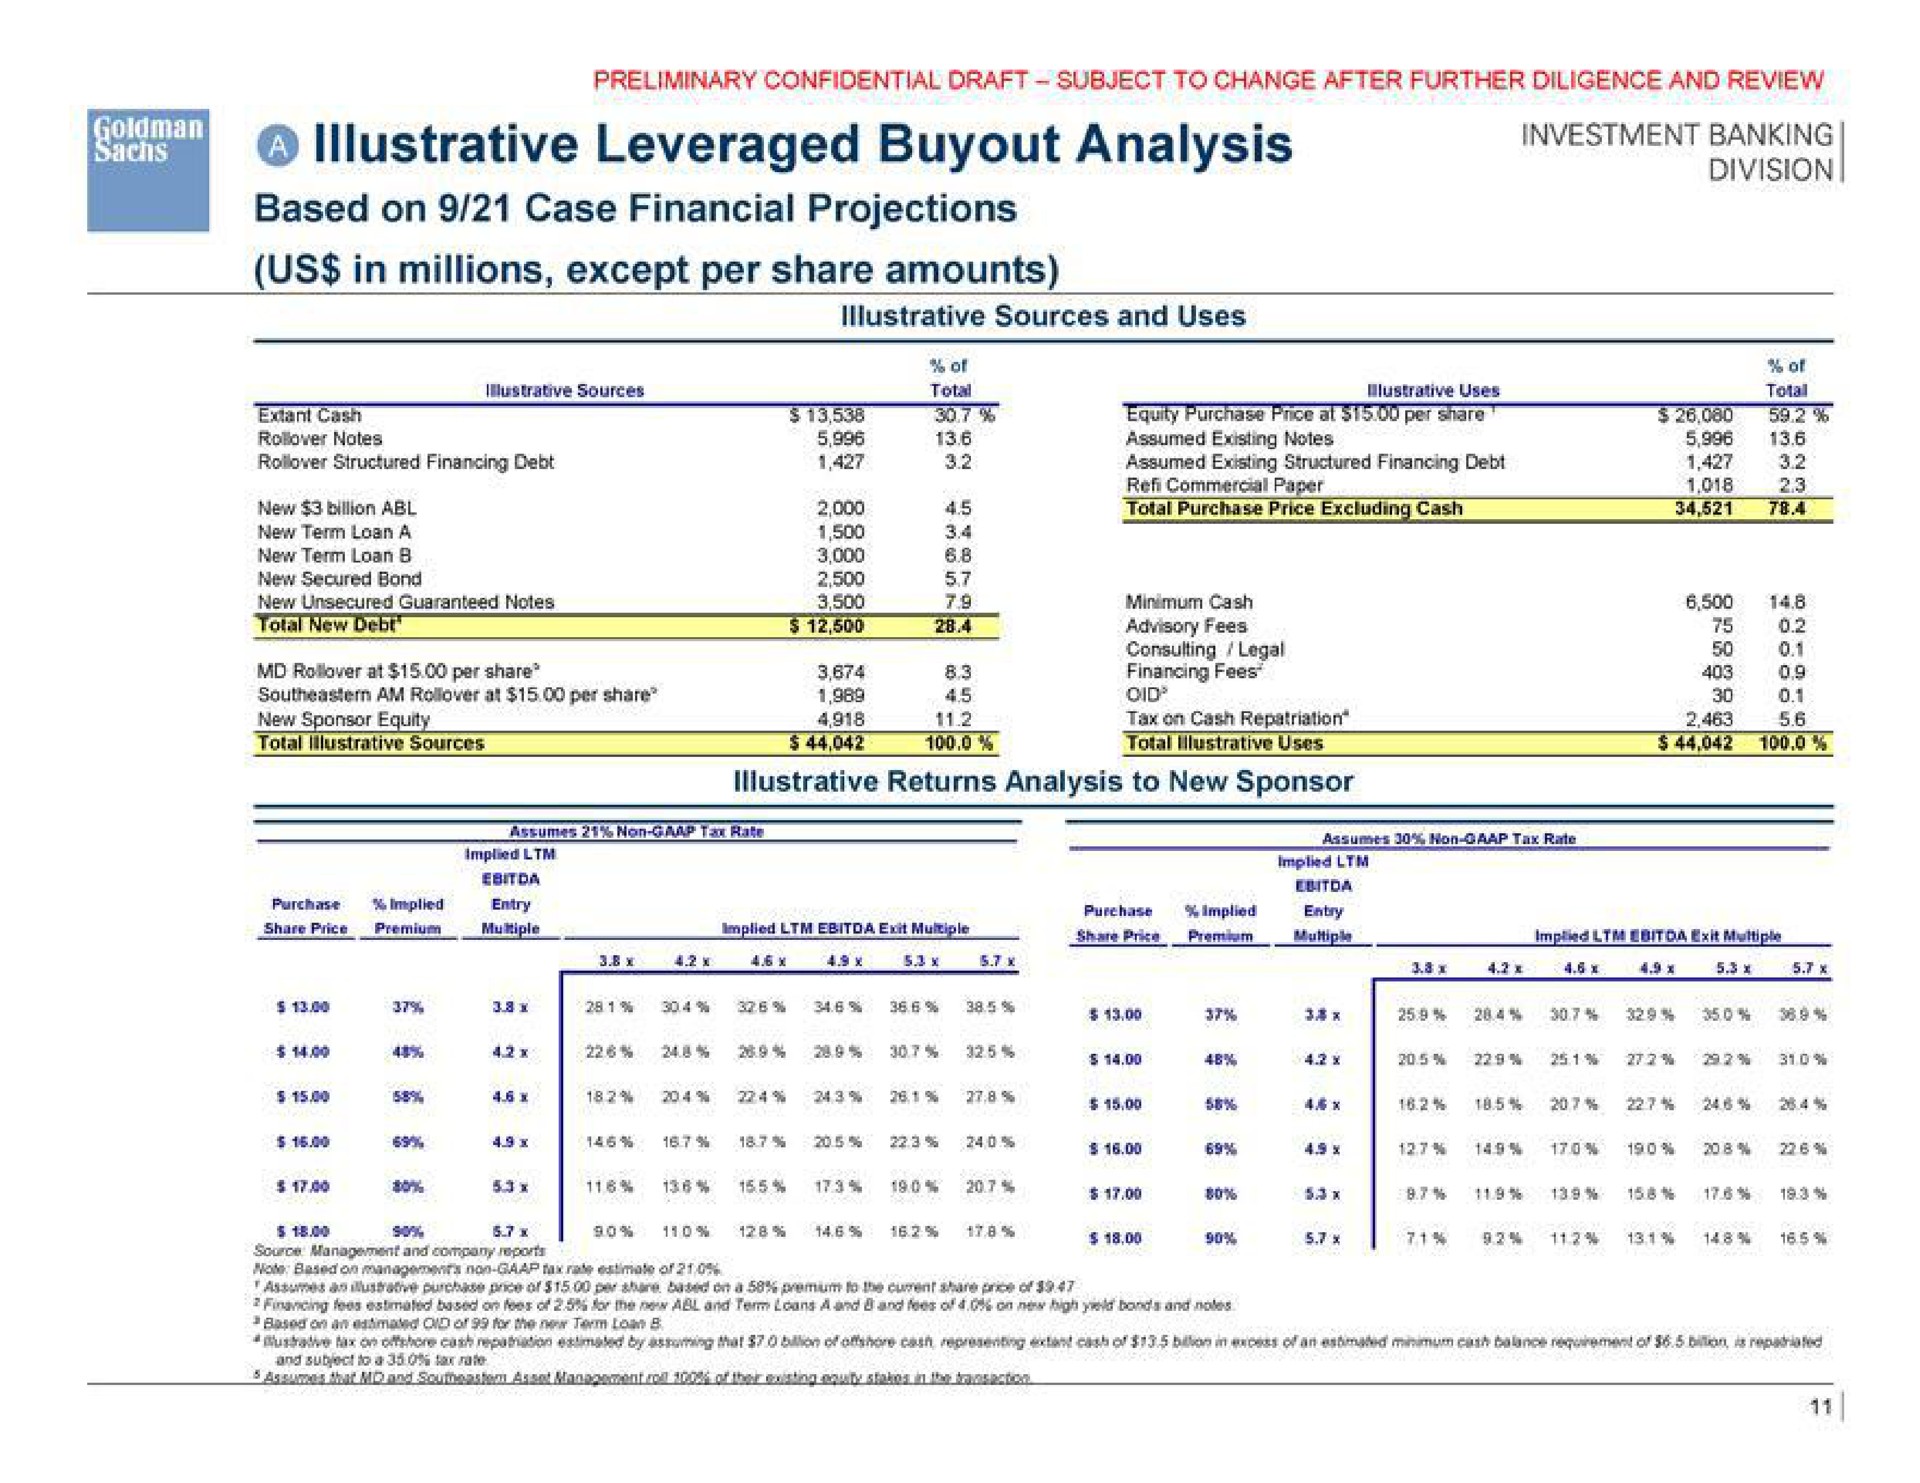 illustrative leveraged analysis based on case financial projections us in millions except per share amounts | Goldman Sachs